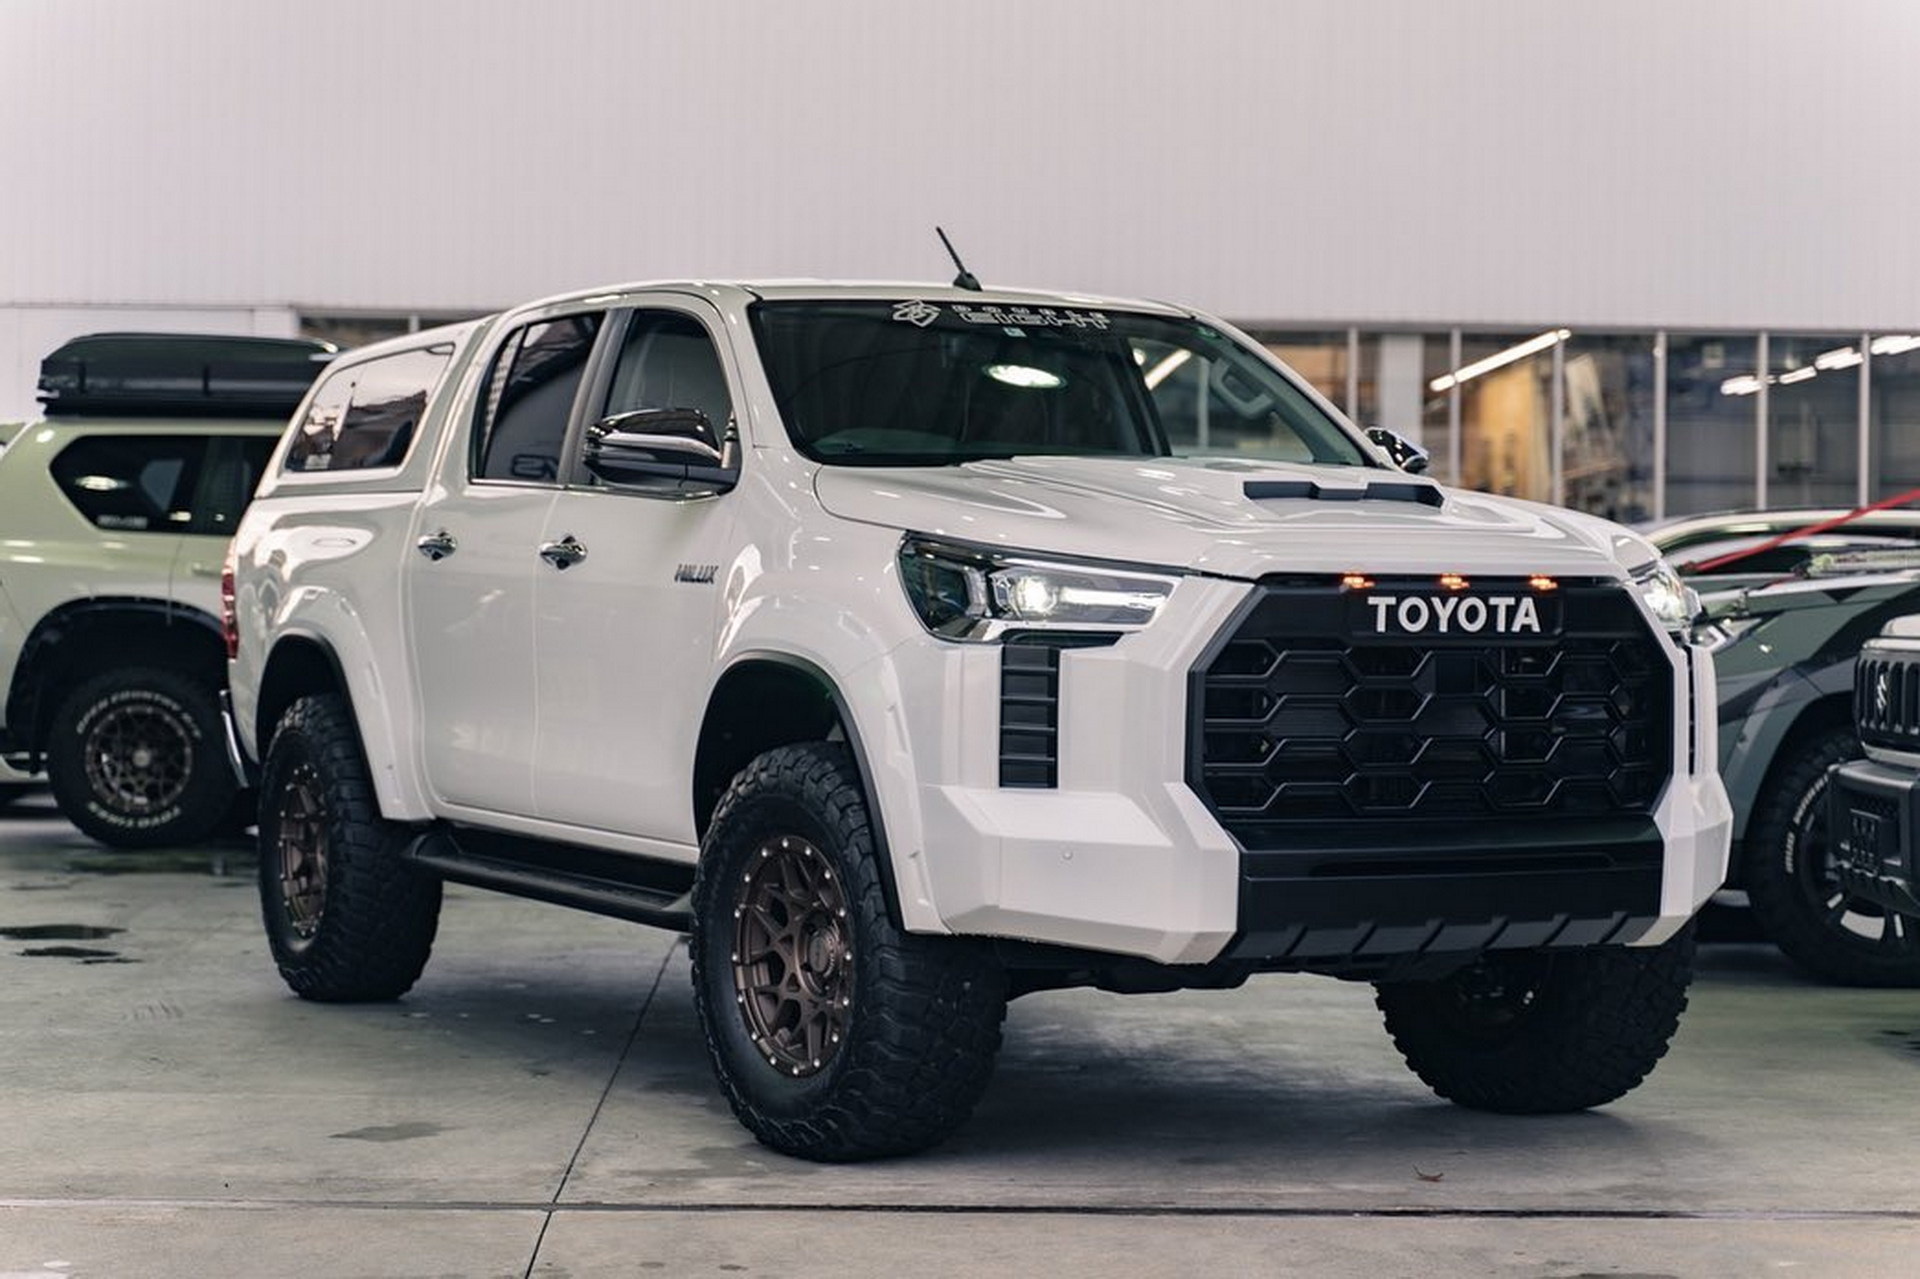 GMG-88-Toyota-Hilux-With-Tundra-Face-12.jpg